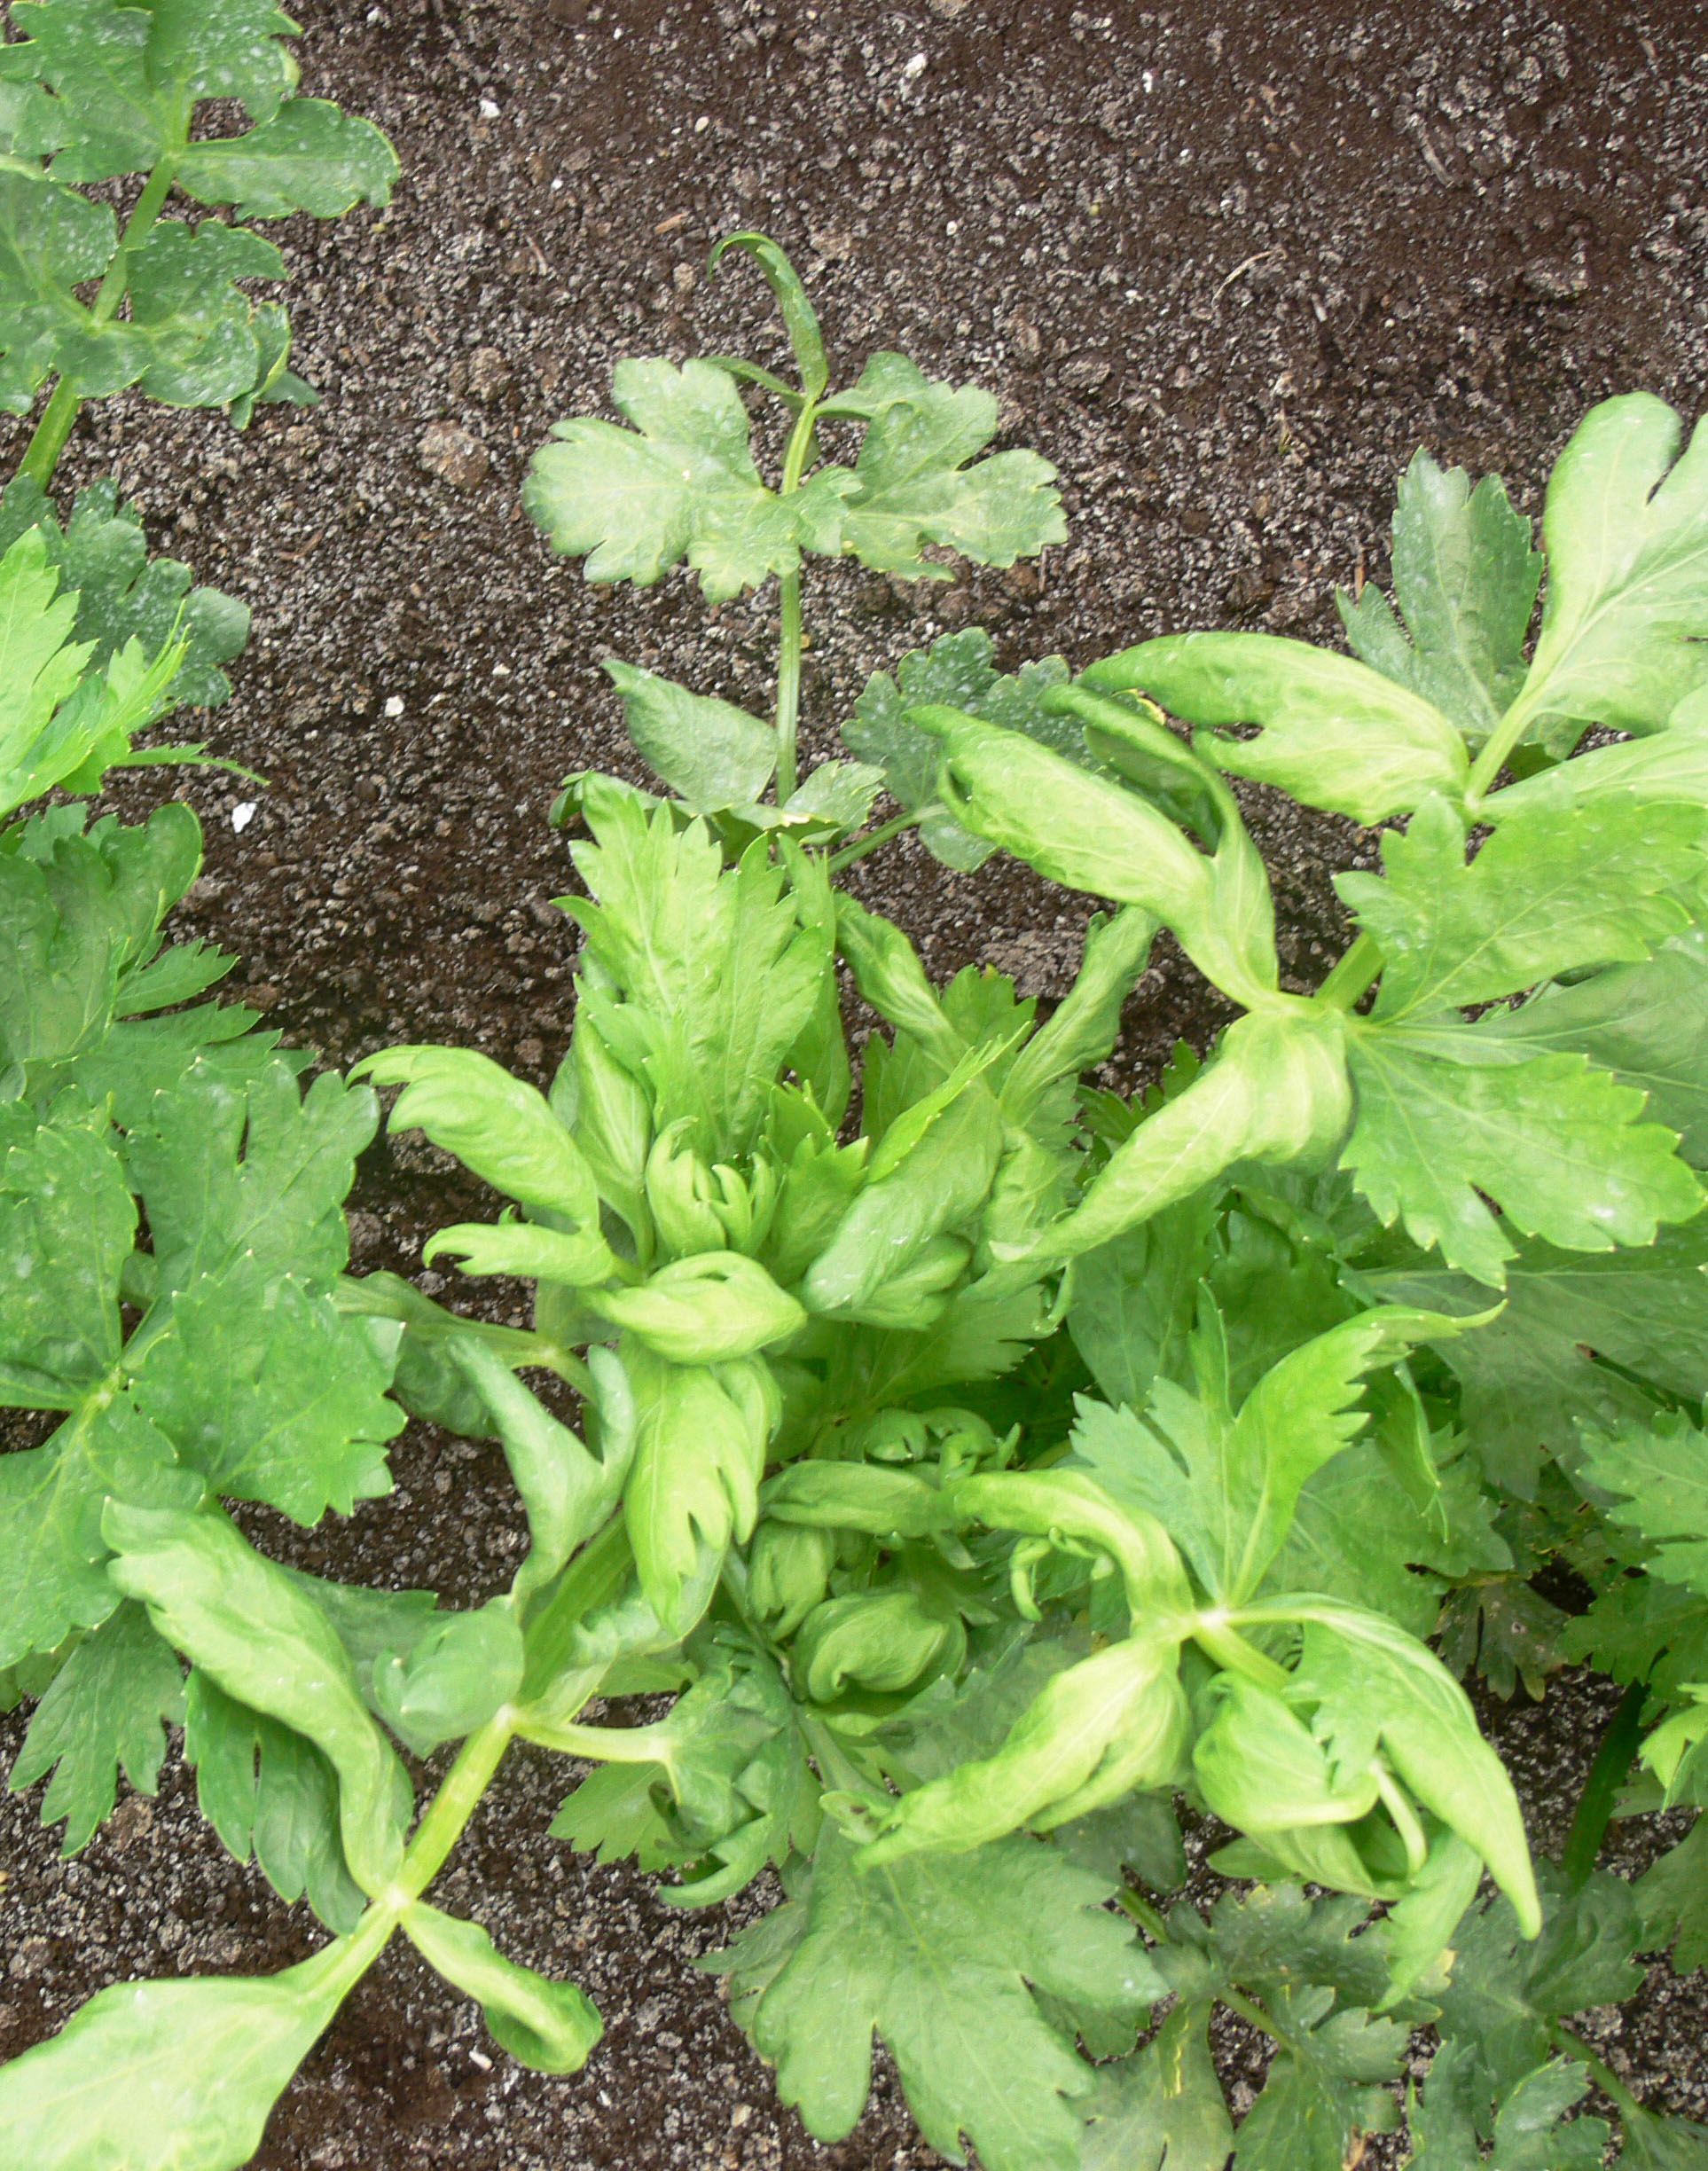 Close-up of a celery plant in the field showing curled leaves